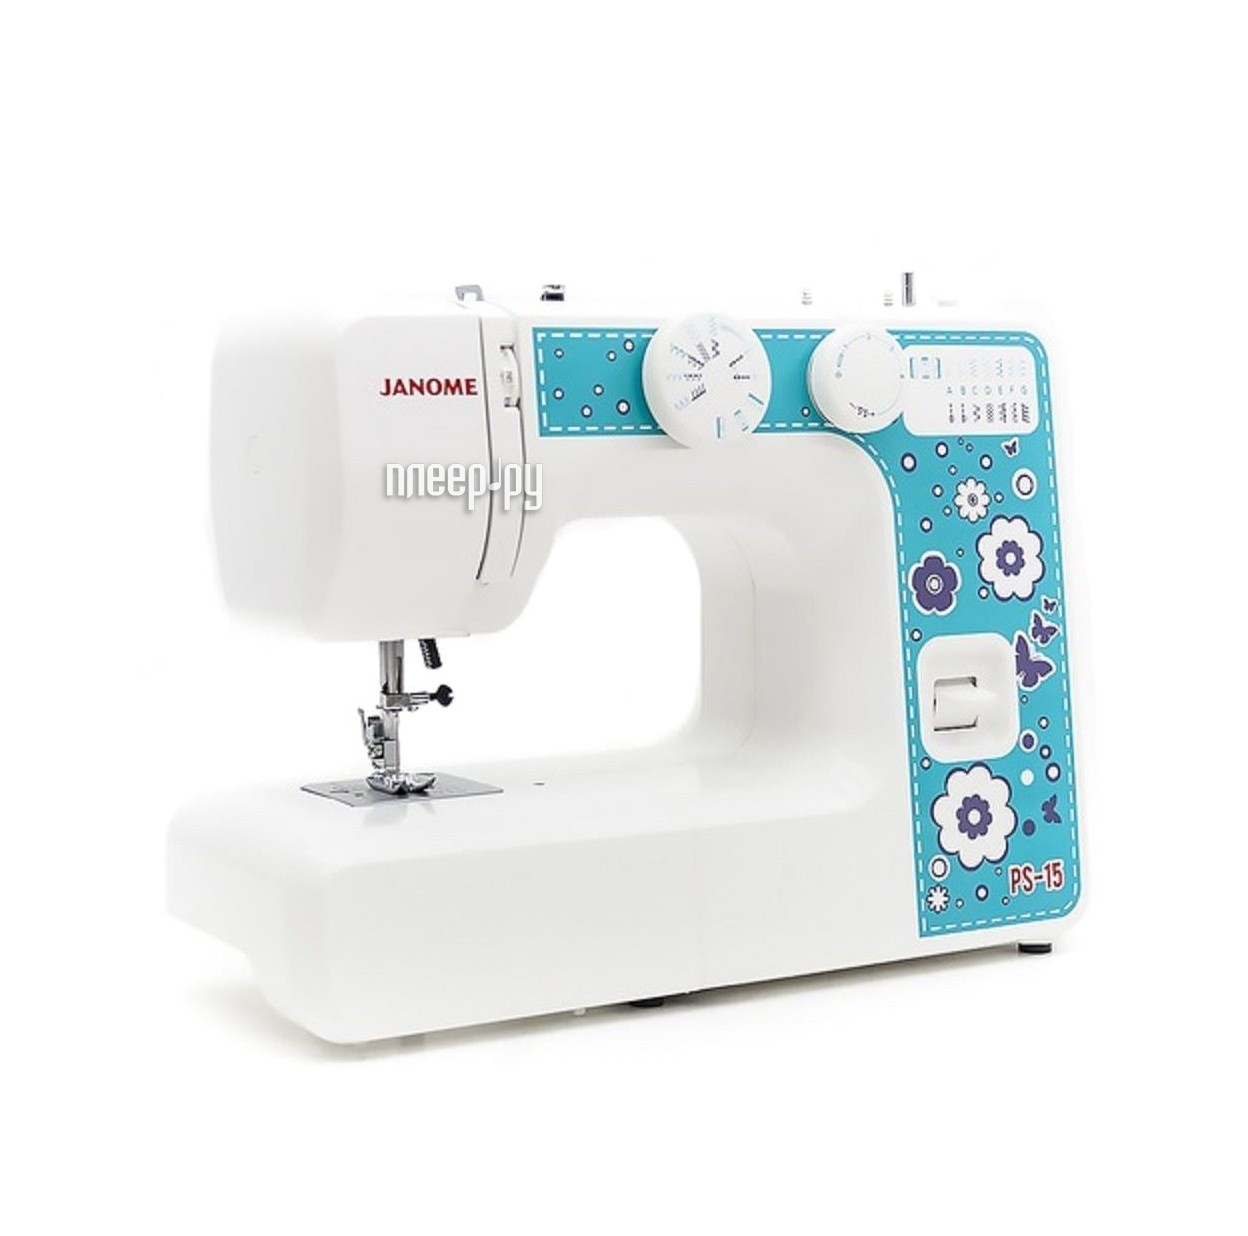   Janome PS-15  5712 